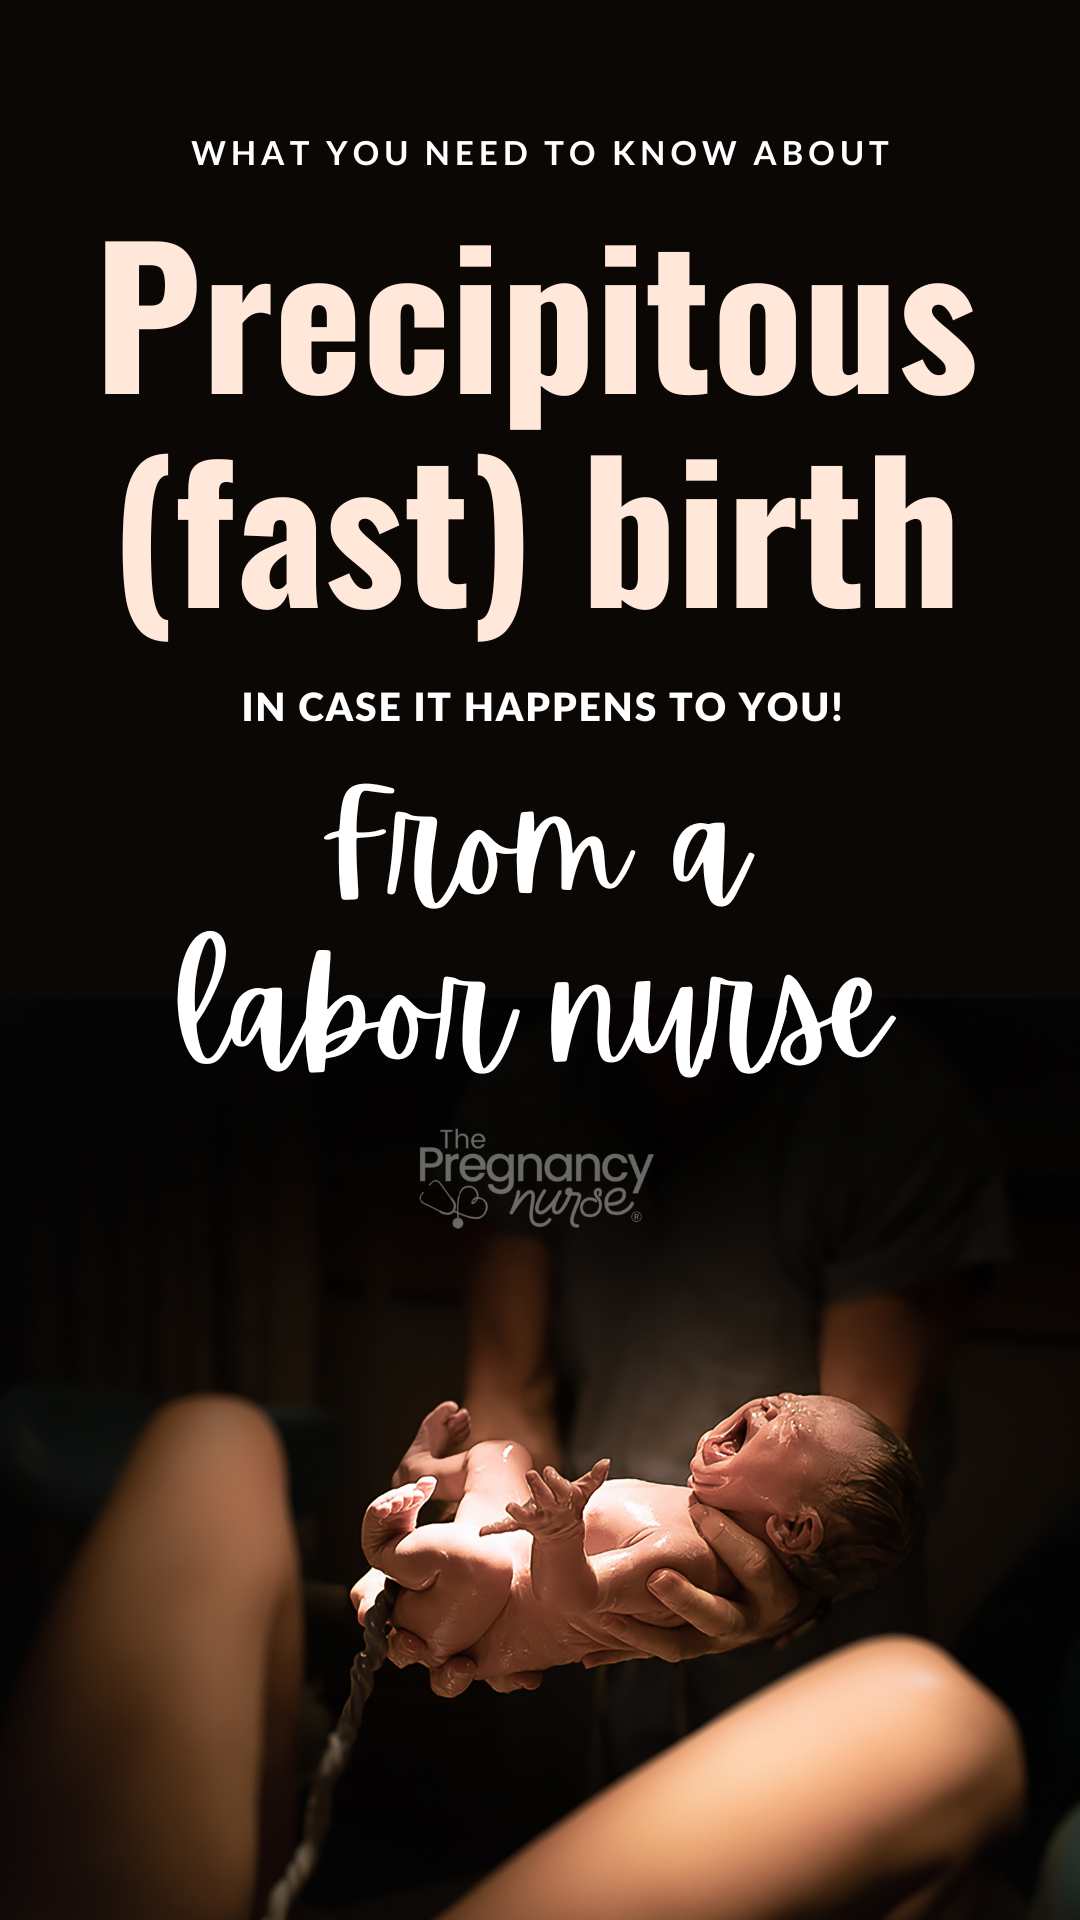 Fast and furious! Learn about precipitous births, where labor progresses rapidly, often in less than three hours. From recognizing the signs to preparing for a swift delivery, gain insights into this unique birthing experience. Stay informed and empowered for any scenario on your pregnancy journey. #PrecipitousBirth #LaborSpeed #MomToBe Precipitous birth Labor speed Mom-to-be Childbirth insights Rapid labor Fast delivery Pregnancy journey Labor preparation Birth experience Maternity education